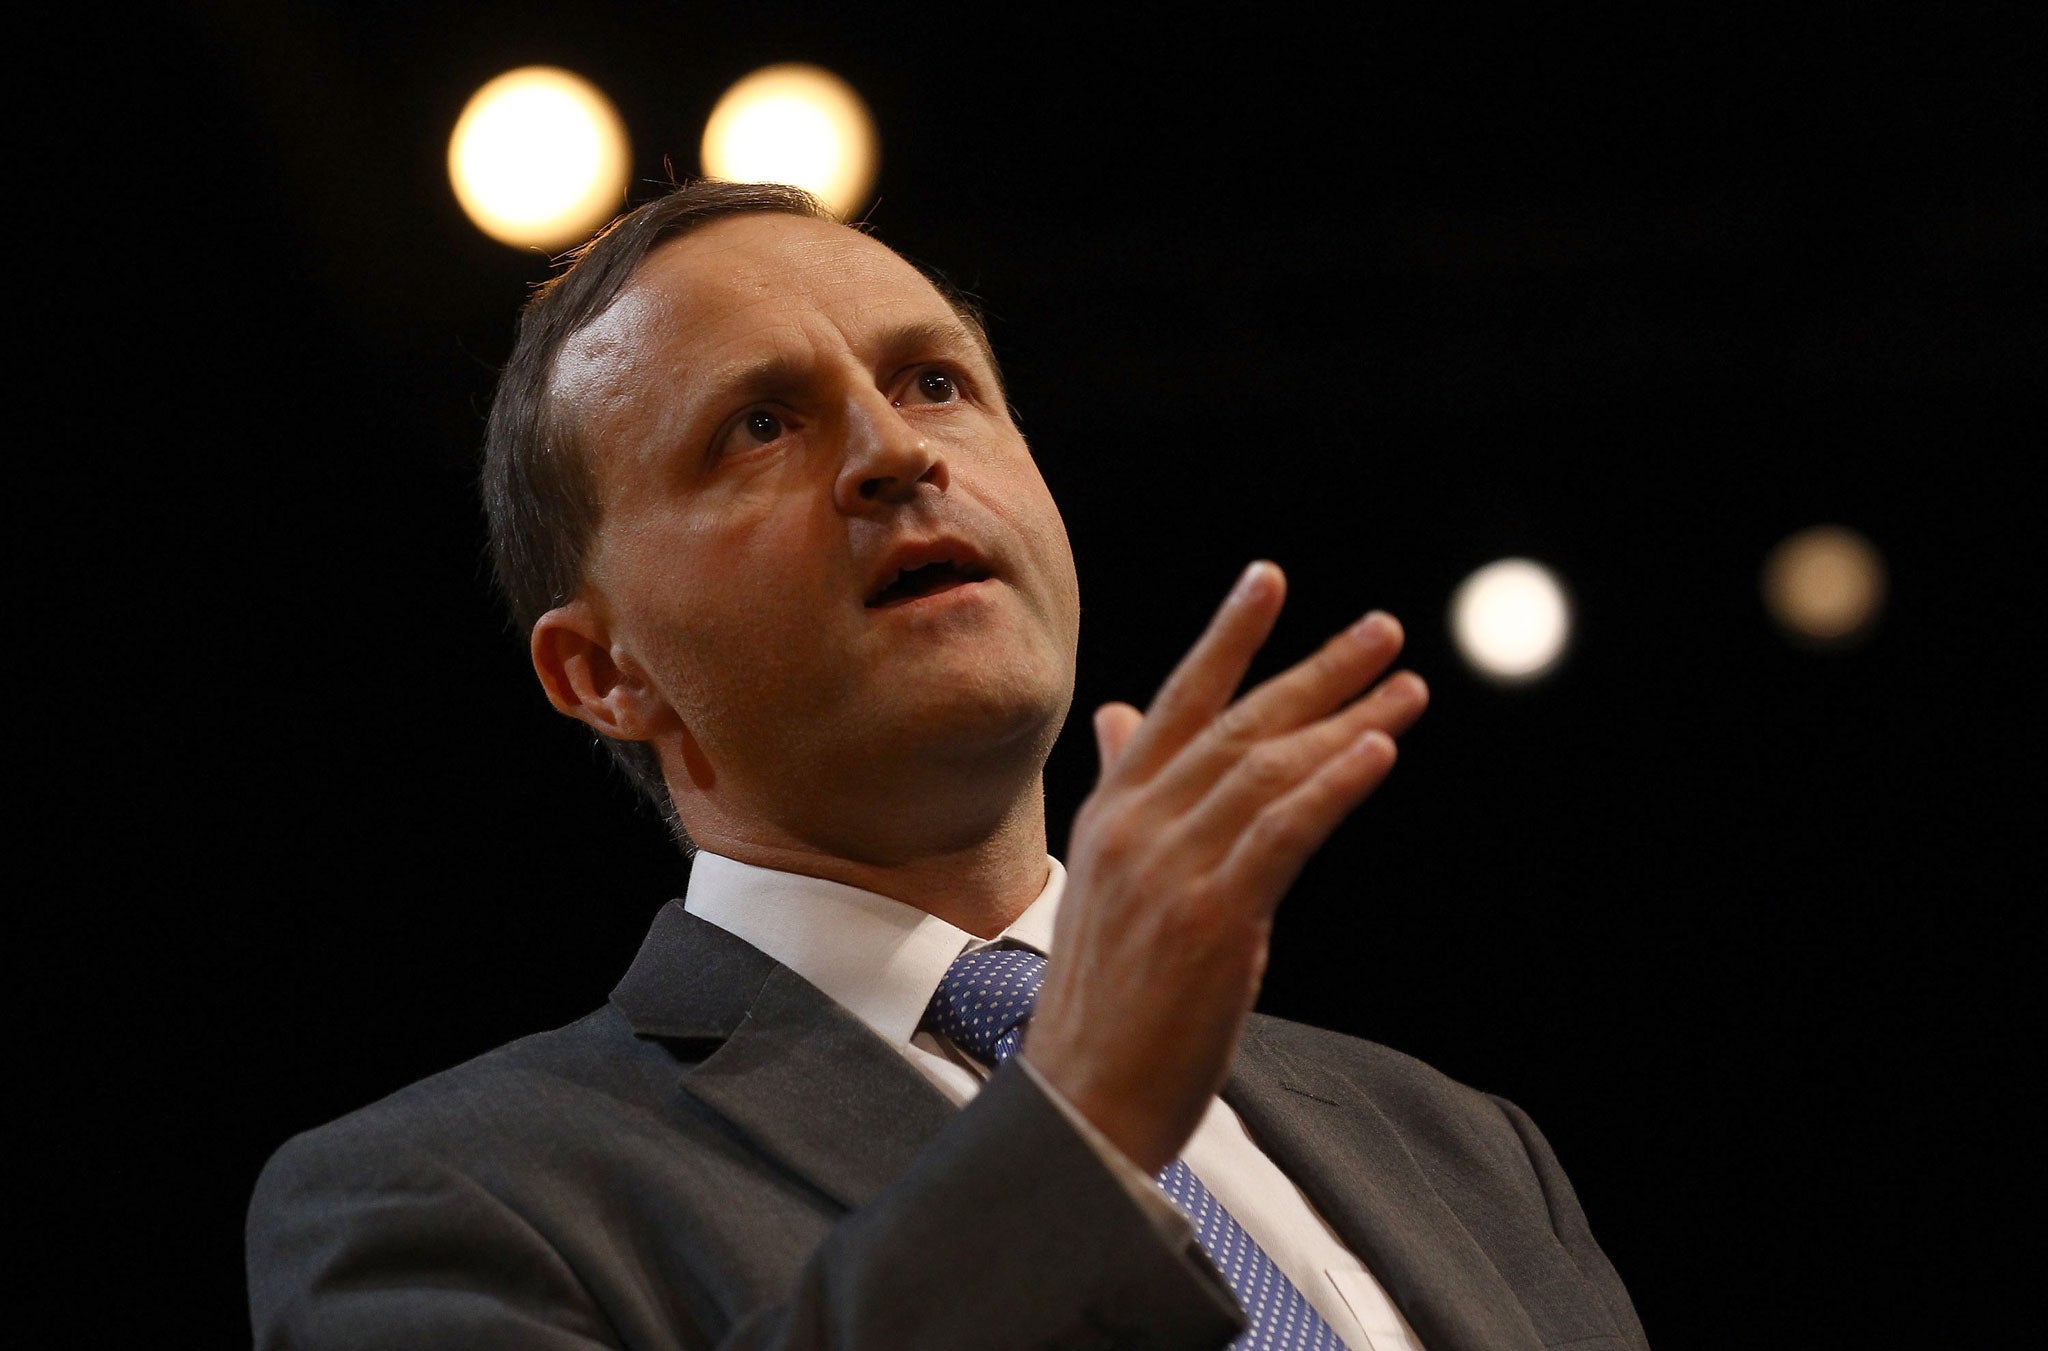 Pensions Minister Steve Webb said he would like to hark back to when 'pensions related to what people earn'